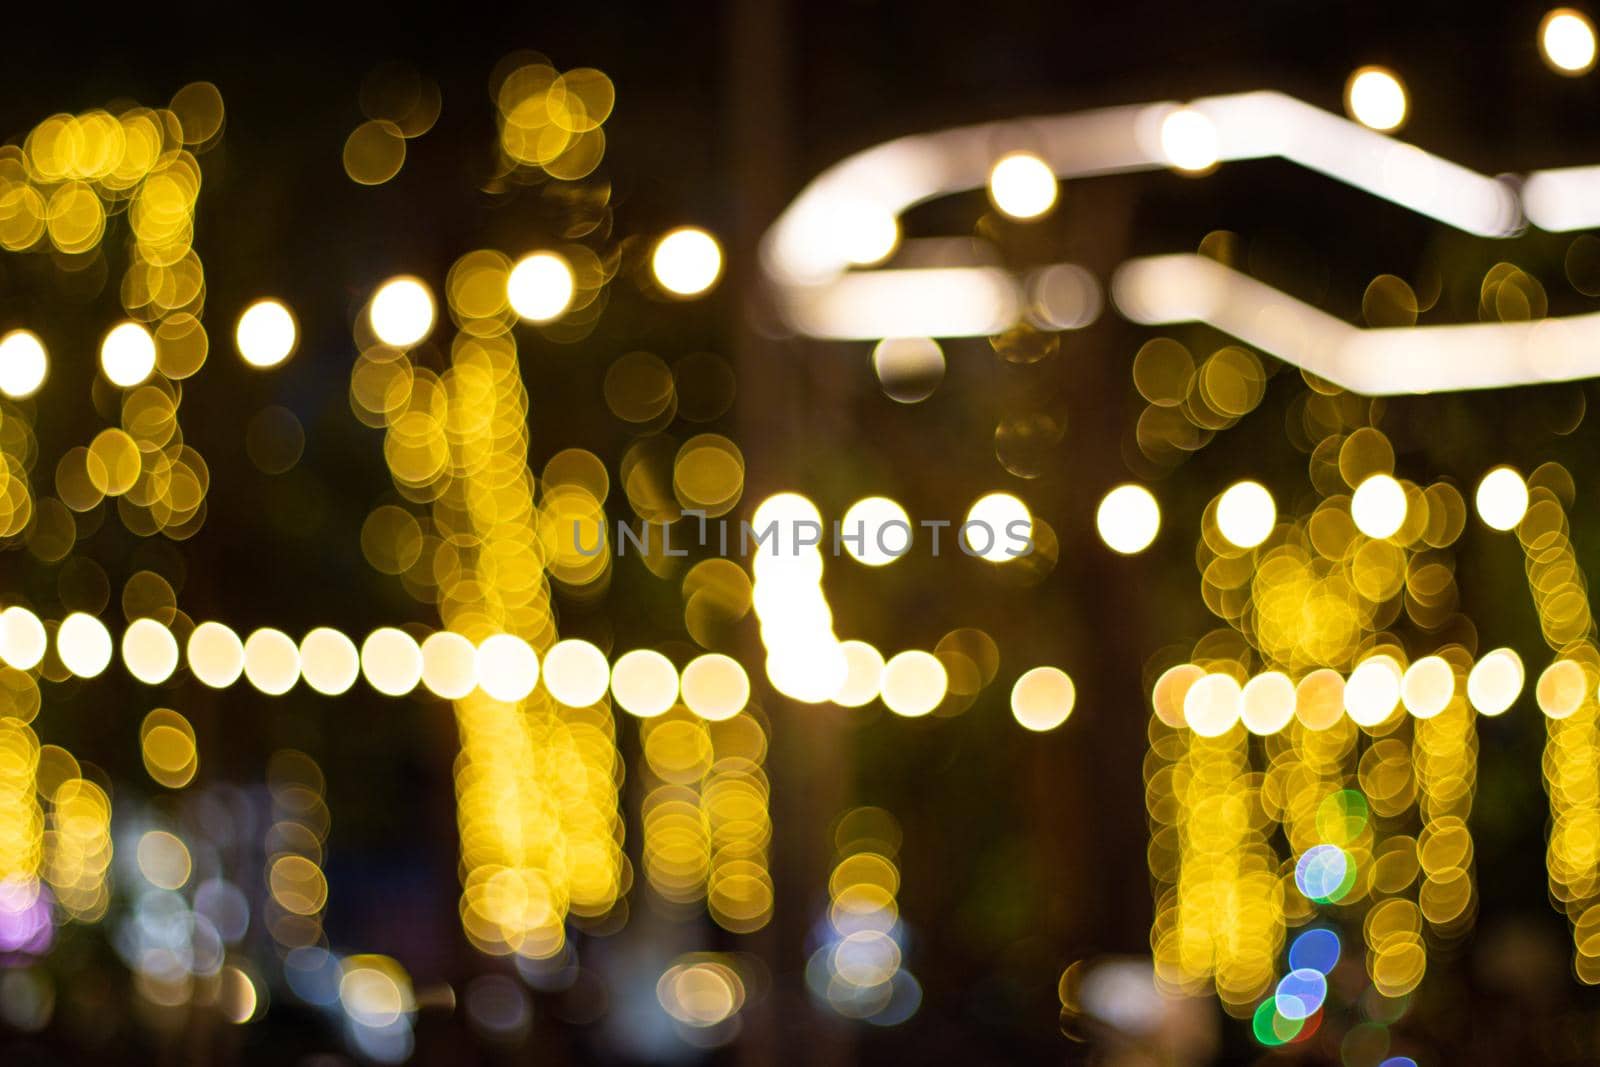 Decorative outdoor string lights hanging on tree in the garden at night time  by piyaphun